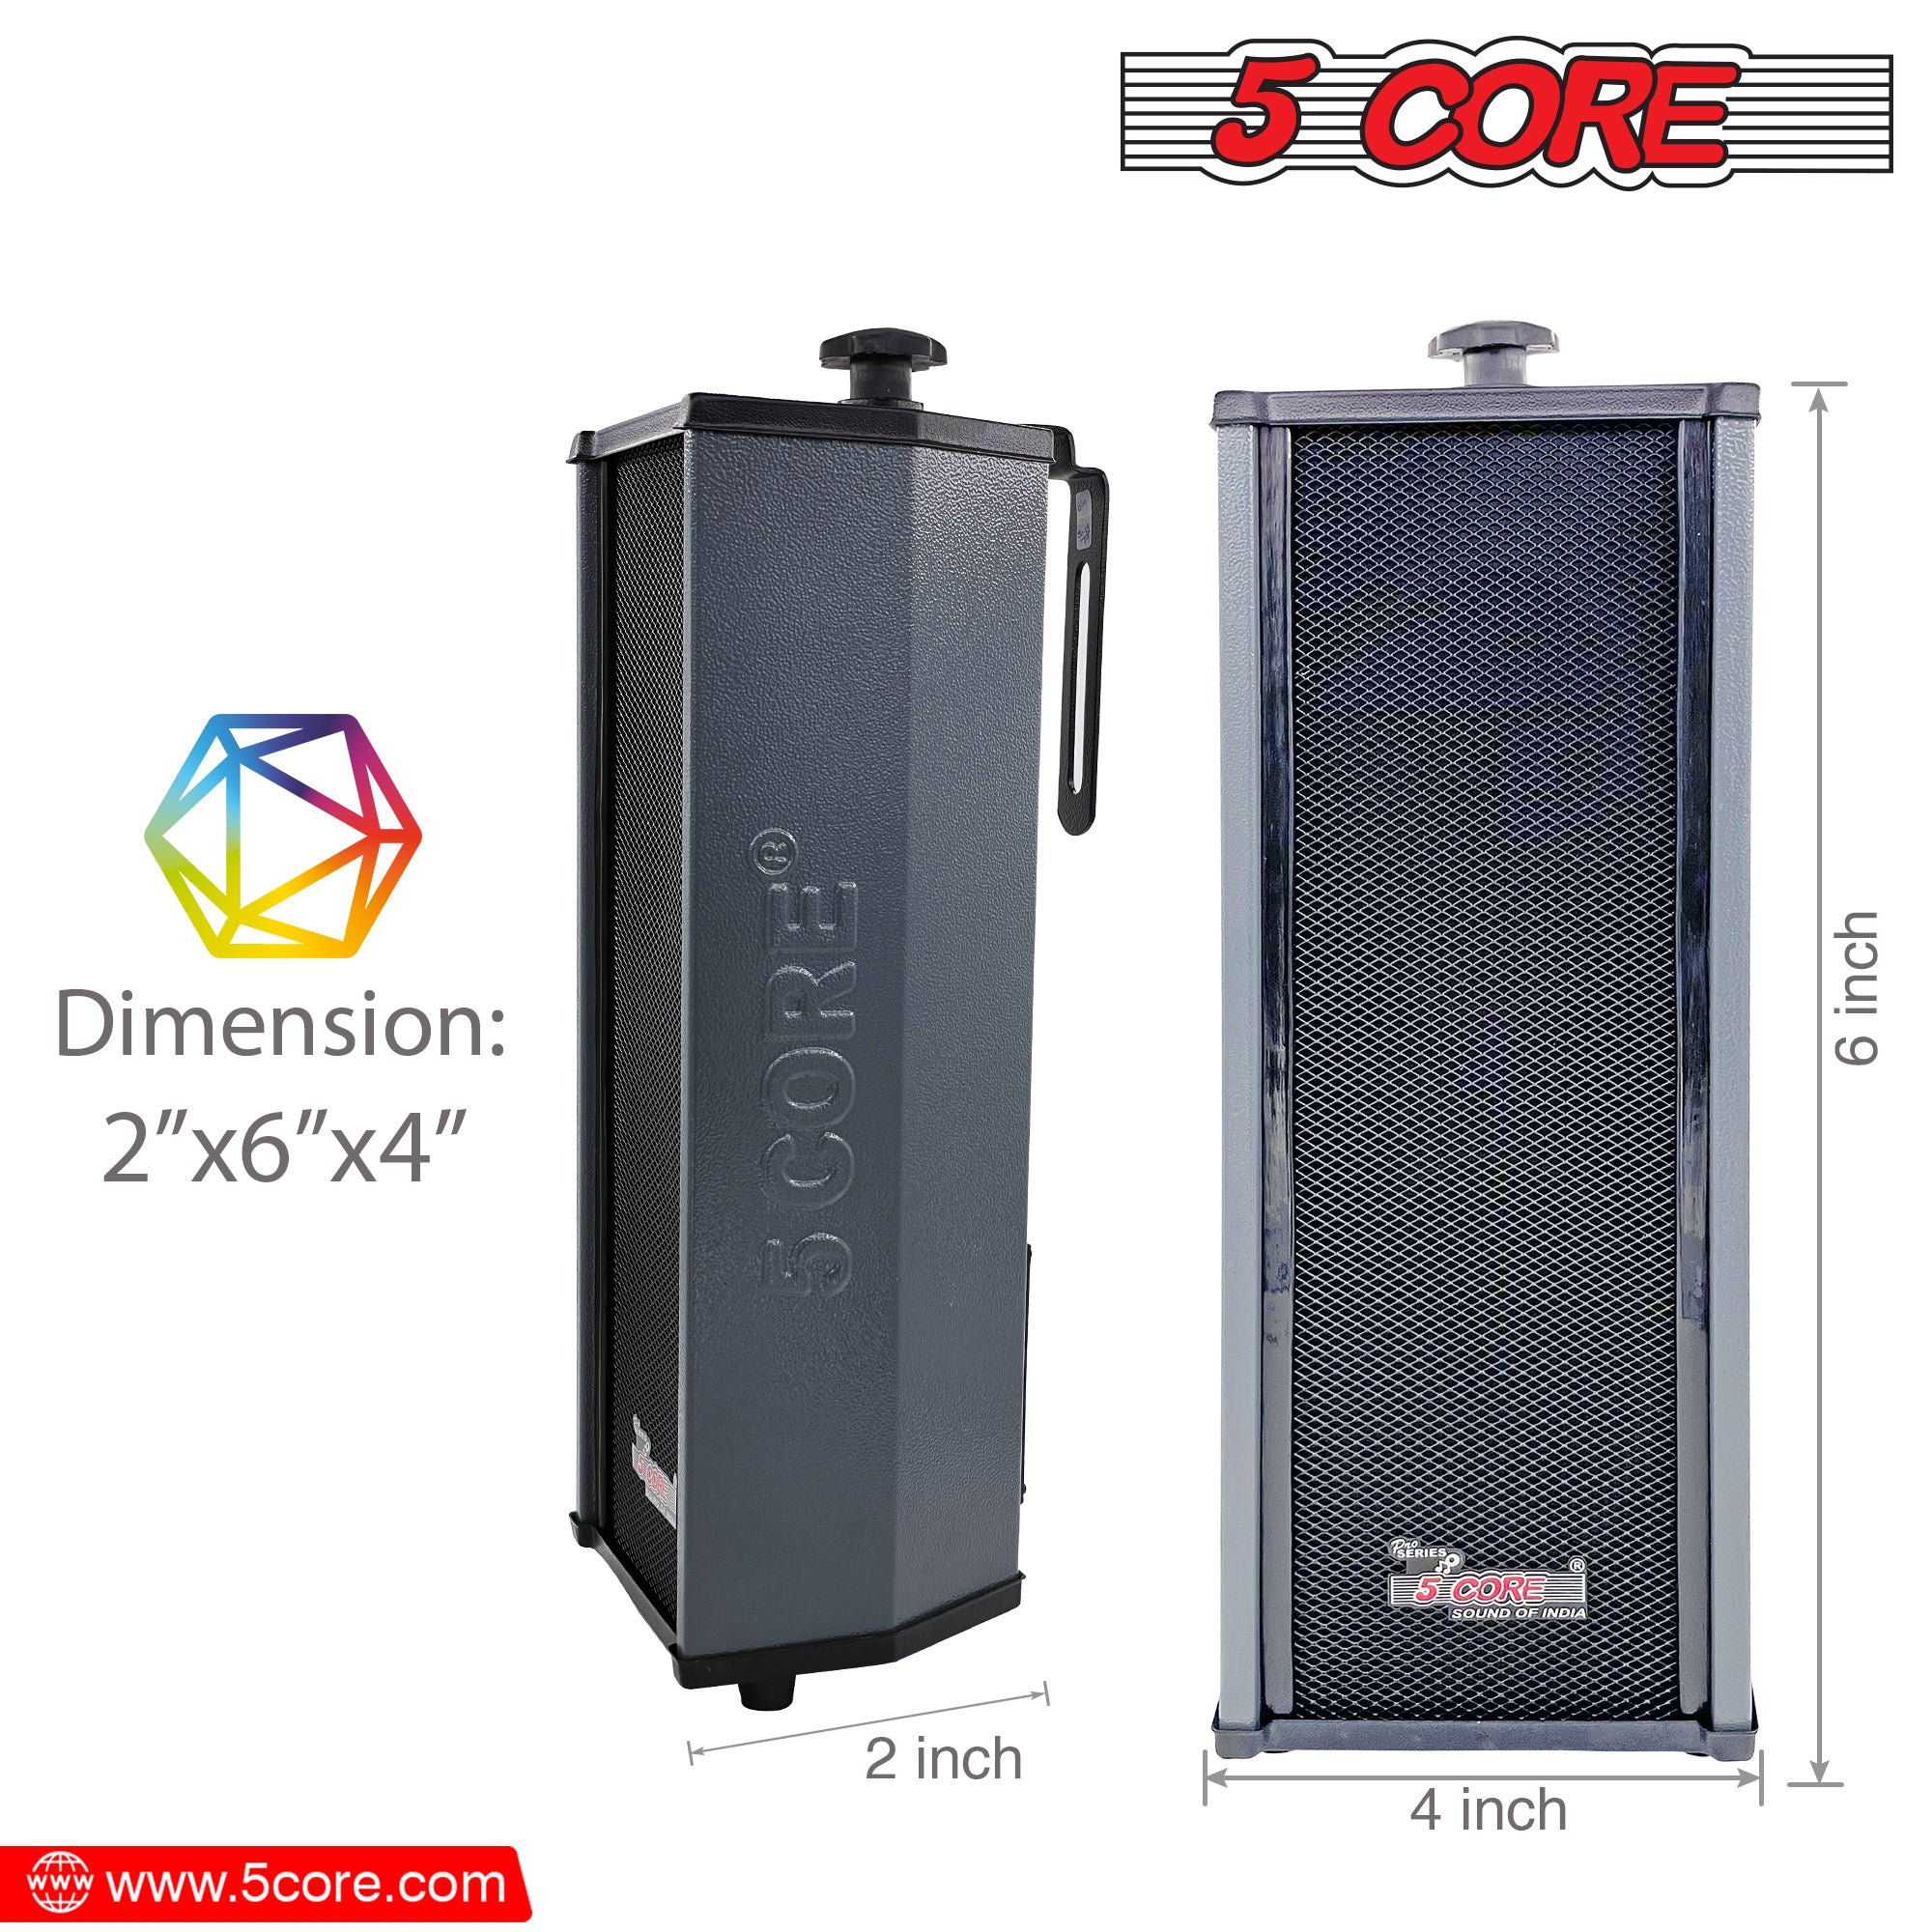 5 Core Wall Speaker System 2Pack • 2 Way 100W PMPO • In-Wall Mount Speakers • Heavy Duty Enclosure